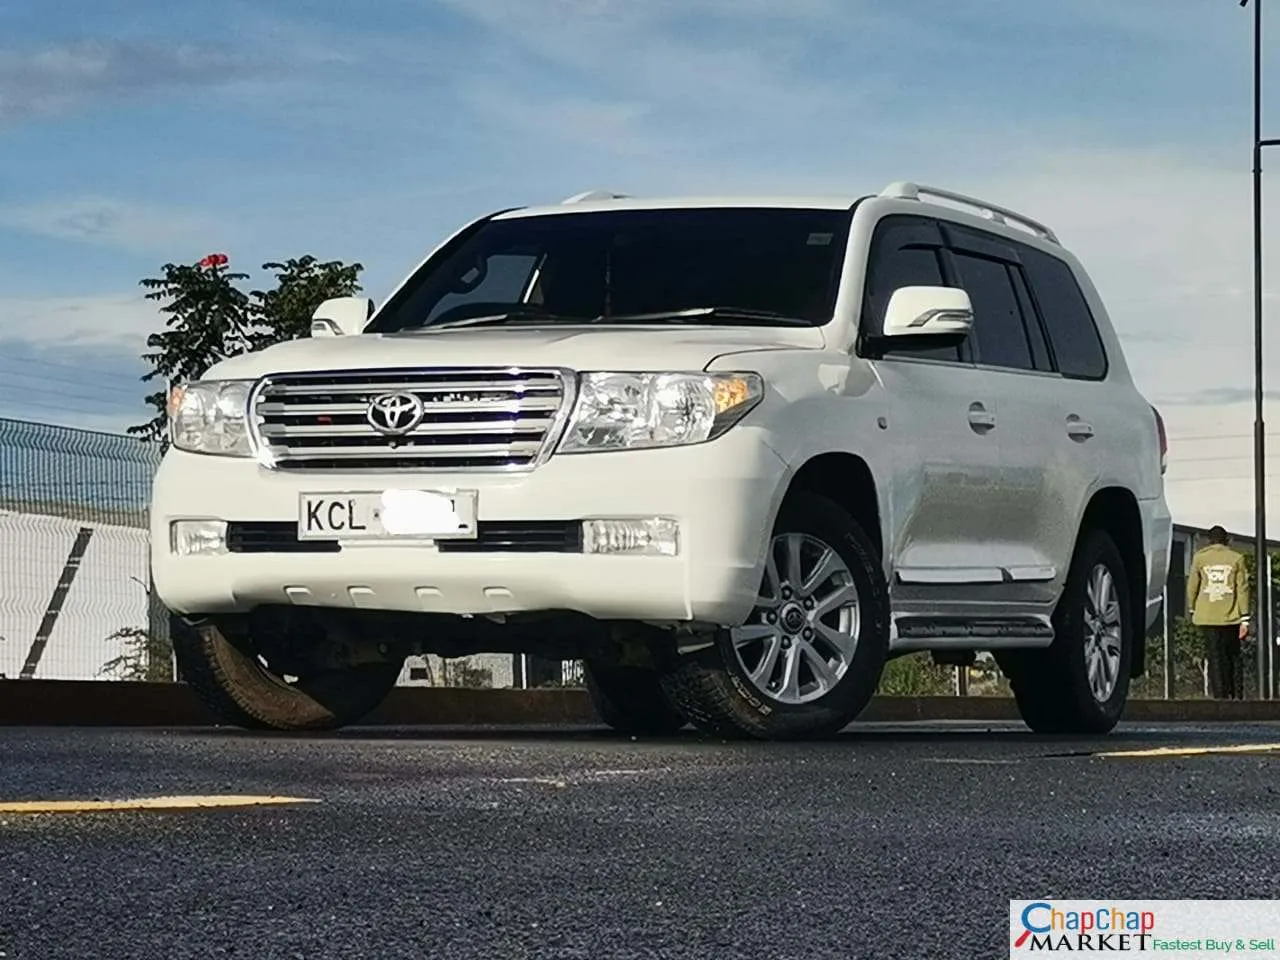 Toyota Land cruiser V8 For Sale in Kenya 202 3.3M Only SUNROOF LEATHER TRADE IN OK EXCLUSIVE hot